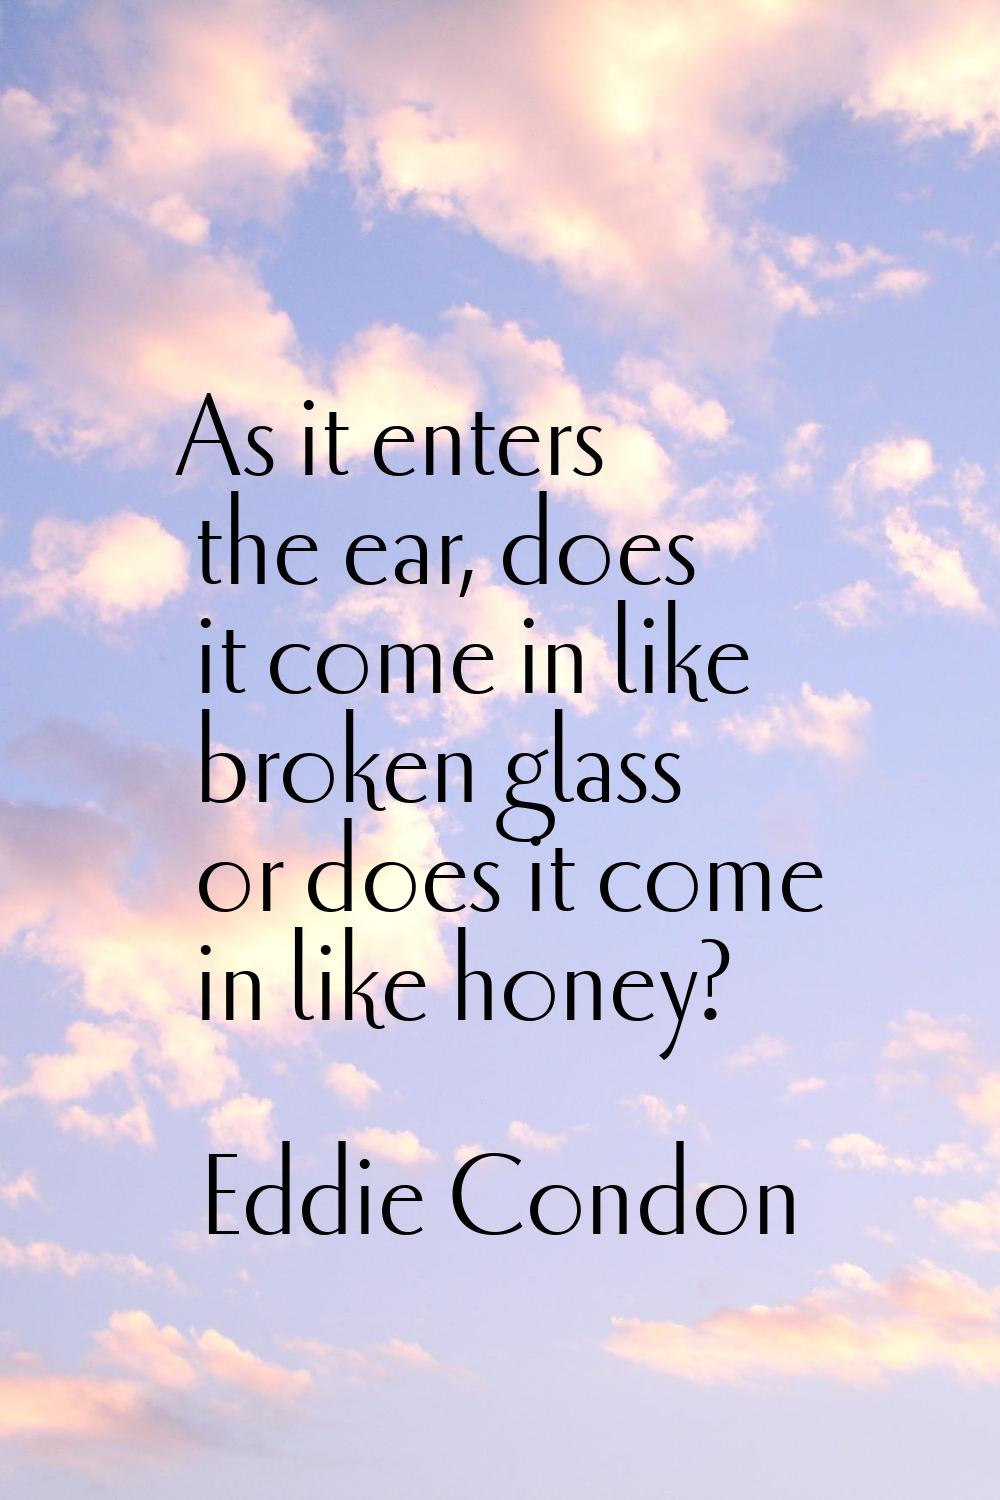 As it enters the ear, does it come in like broken glass or does it come in like honey?